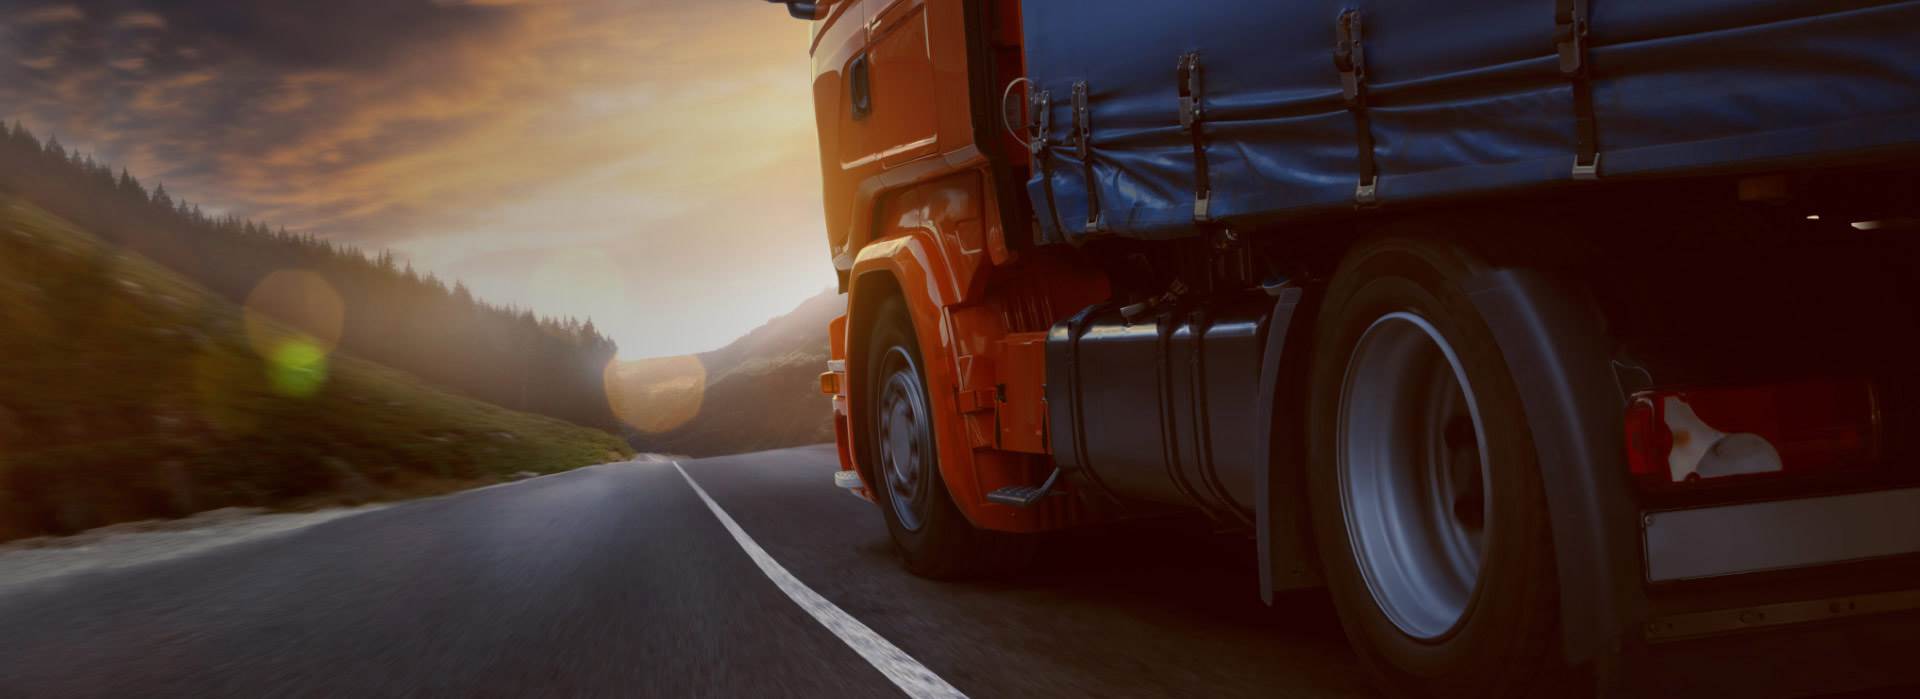 Truck driving image